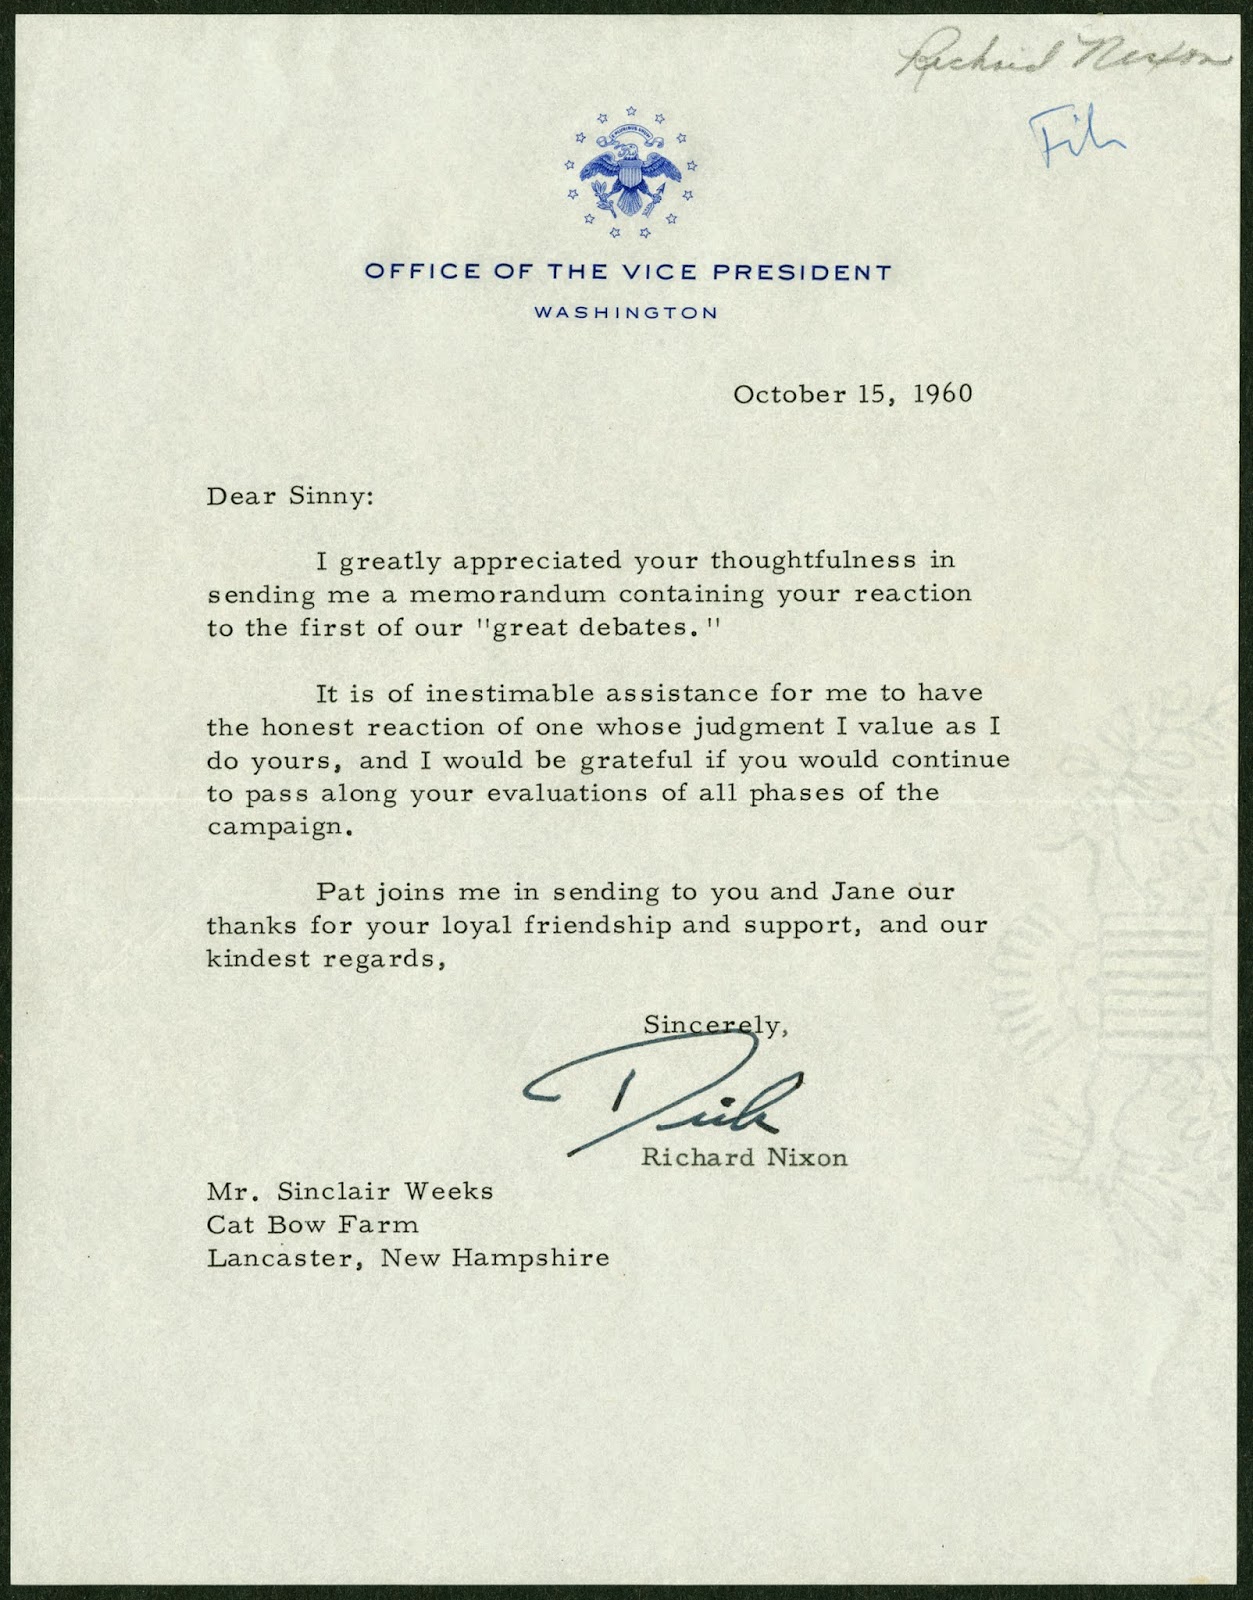 A typed letter from Nixon.